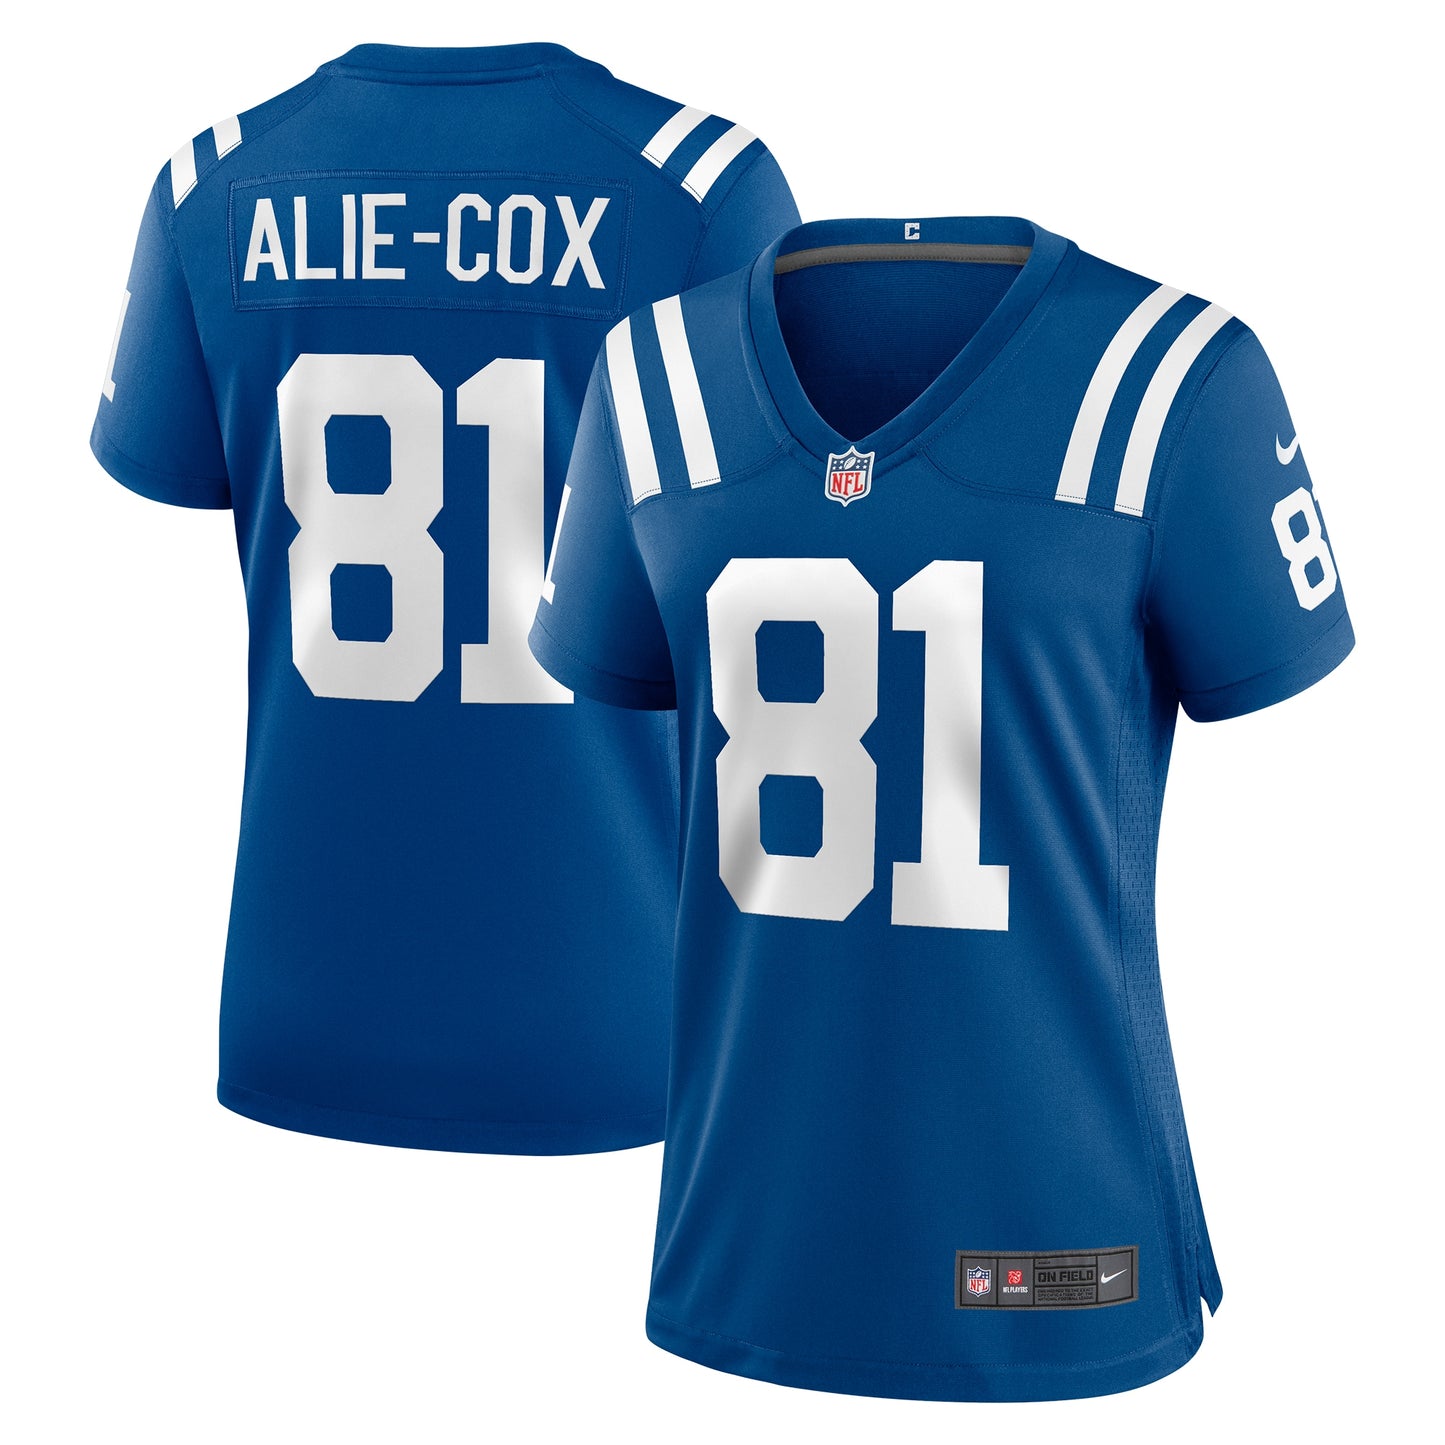 Mo Alie-Cox Indianapolis Colts Nike Women's Team Game Jersey - Royal